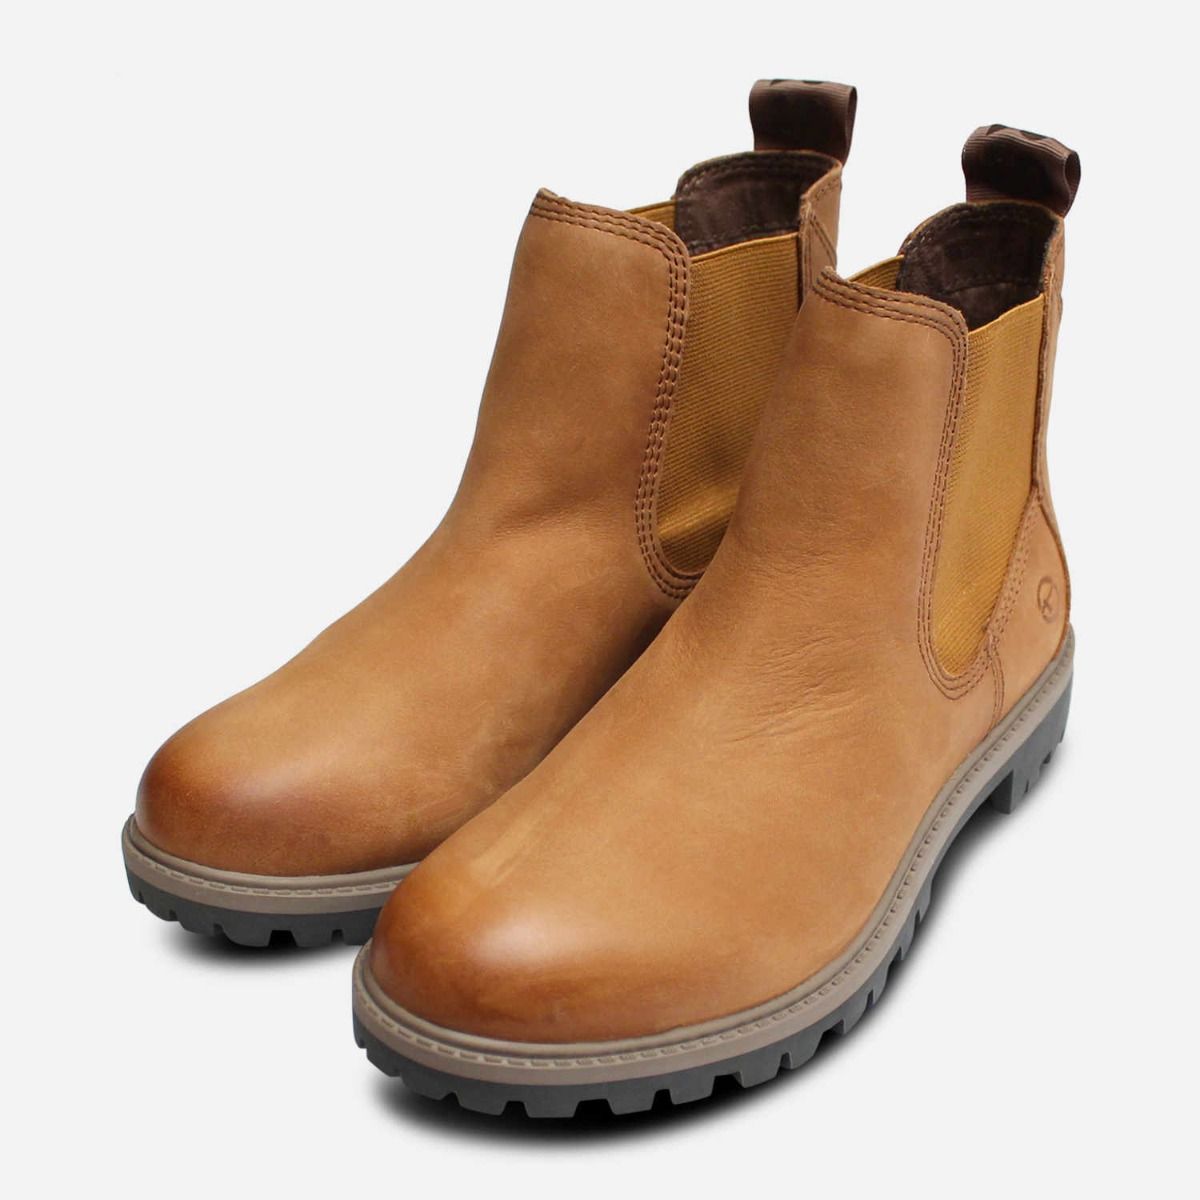 Slip Beige Chelsea Boots with Rubber